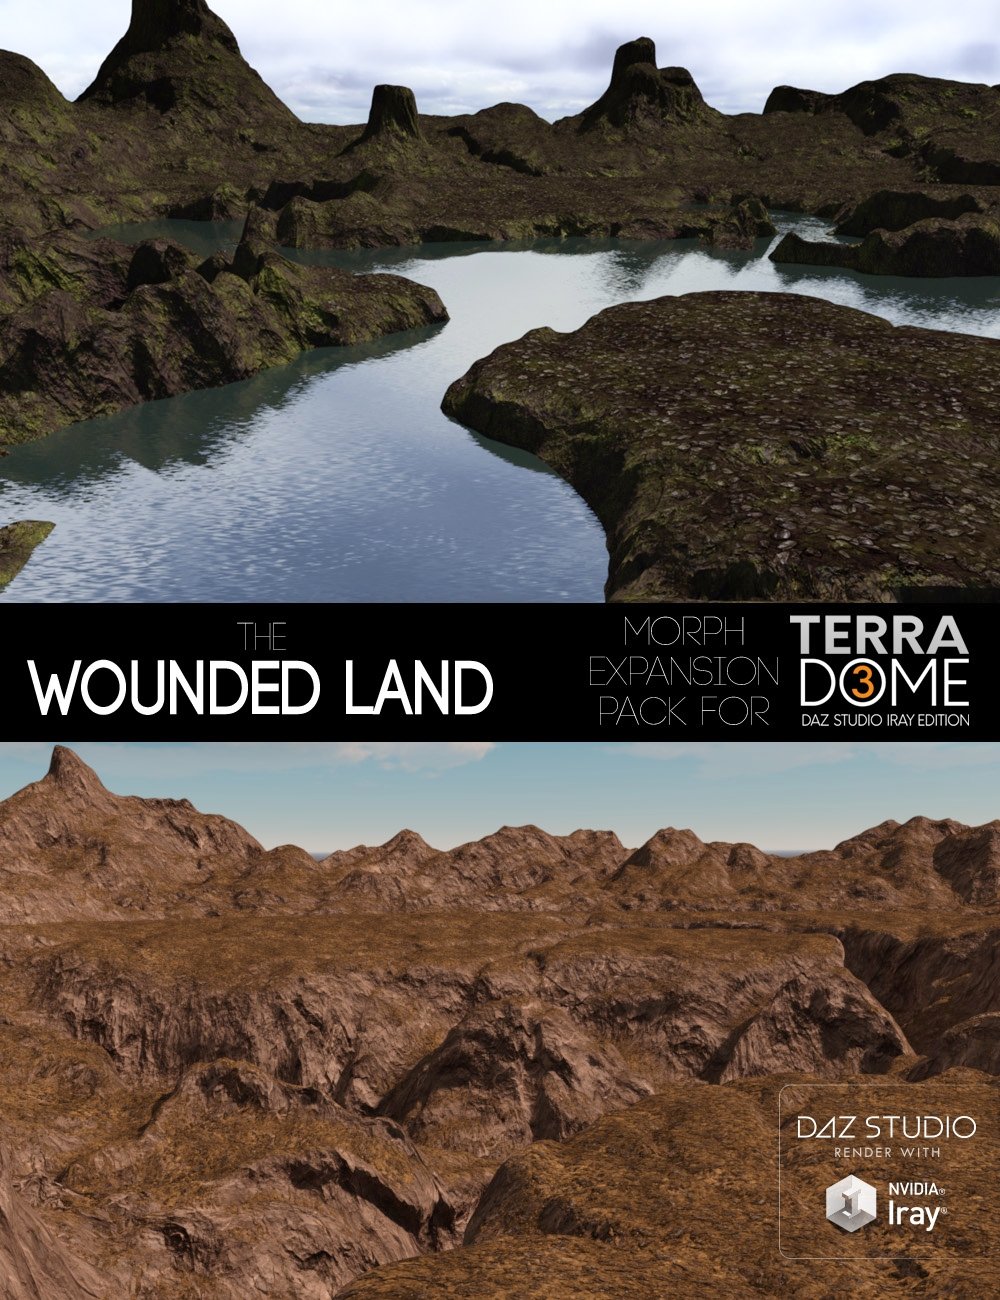 The Wounded Land for TerraDome 3 by: MortemVetus, 3D Models by Daz 3D